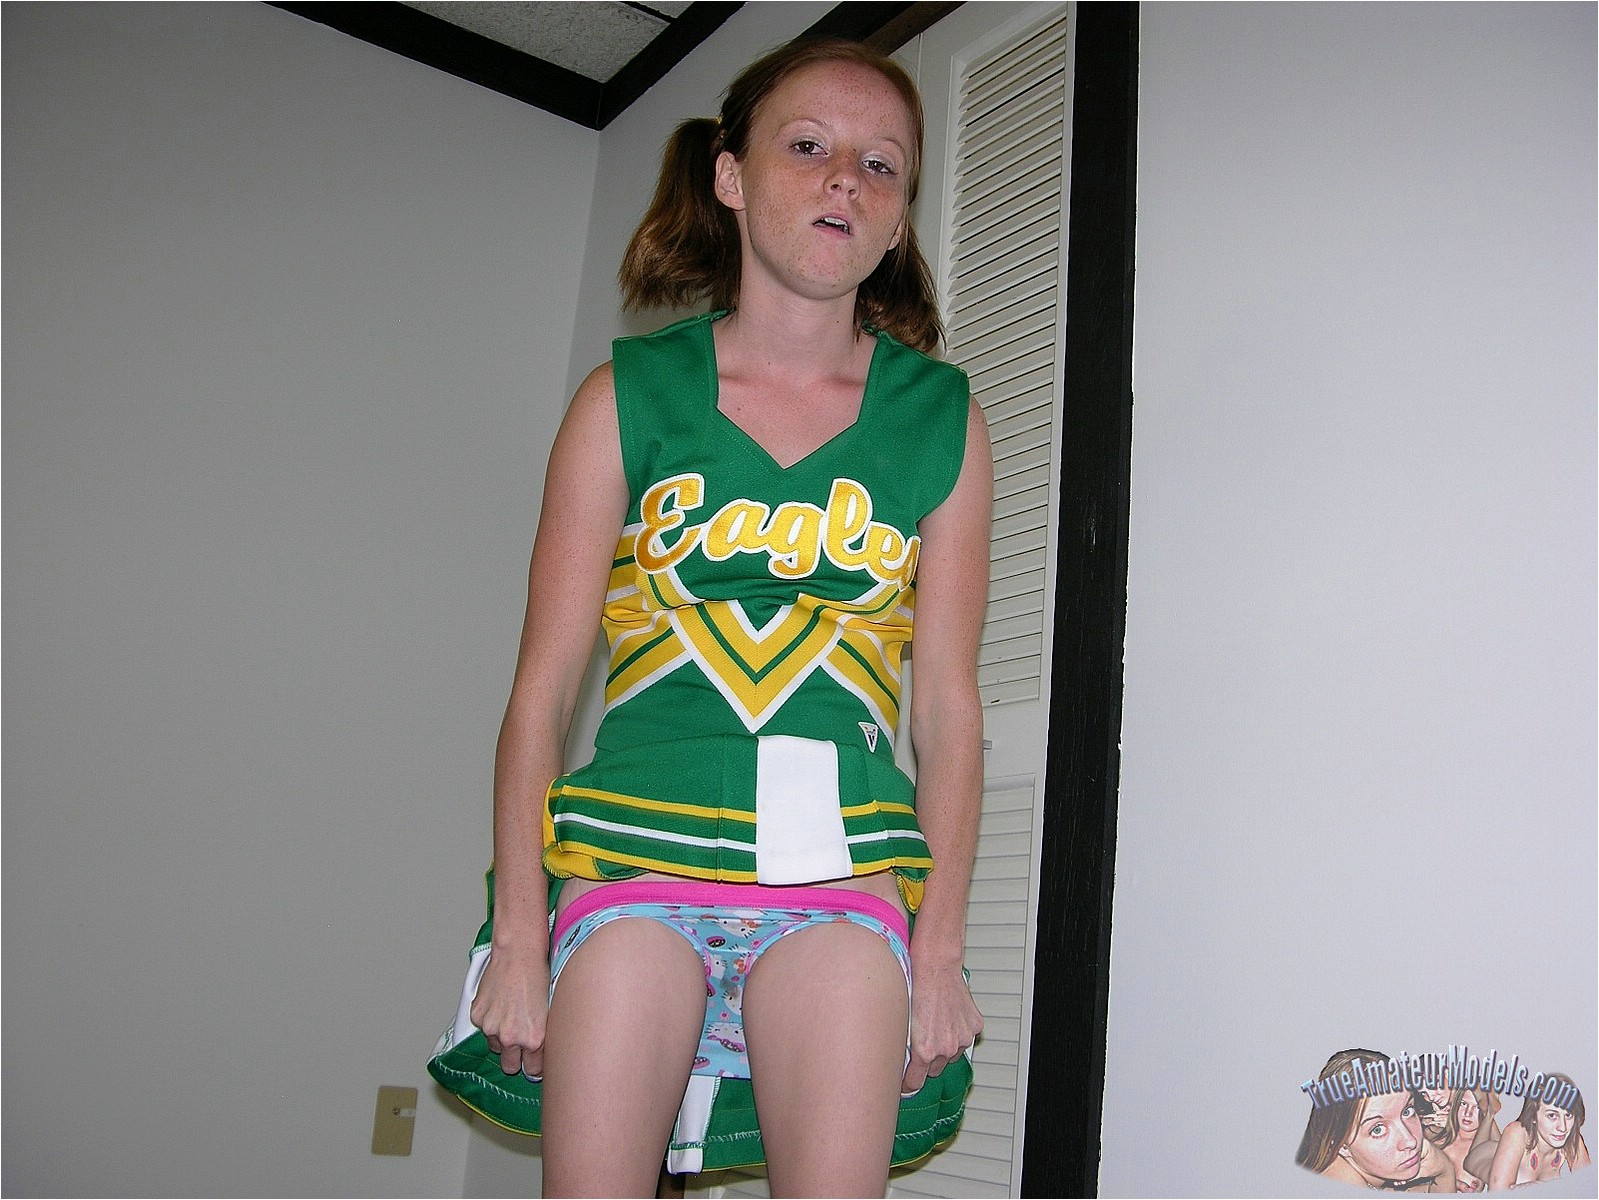 1599px x 1200px - Nude Cheerleader Teen Alissa C. Modeling & Showing Her Tight ...